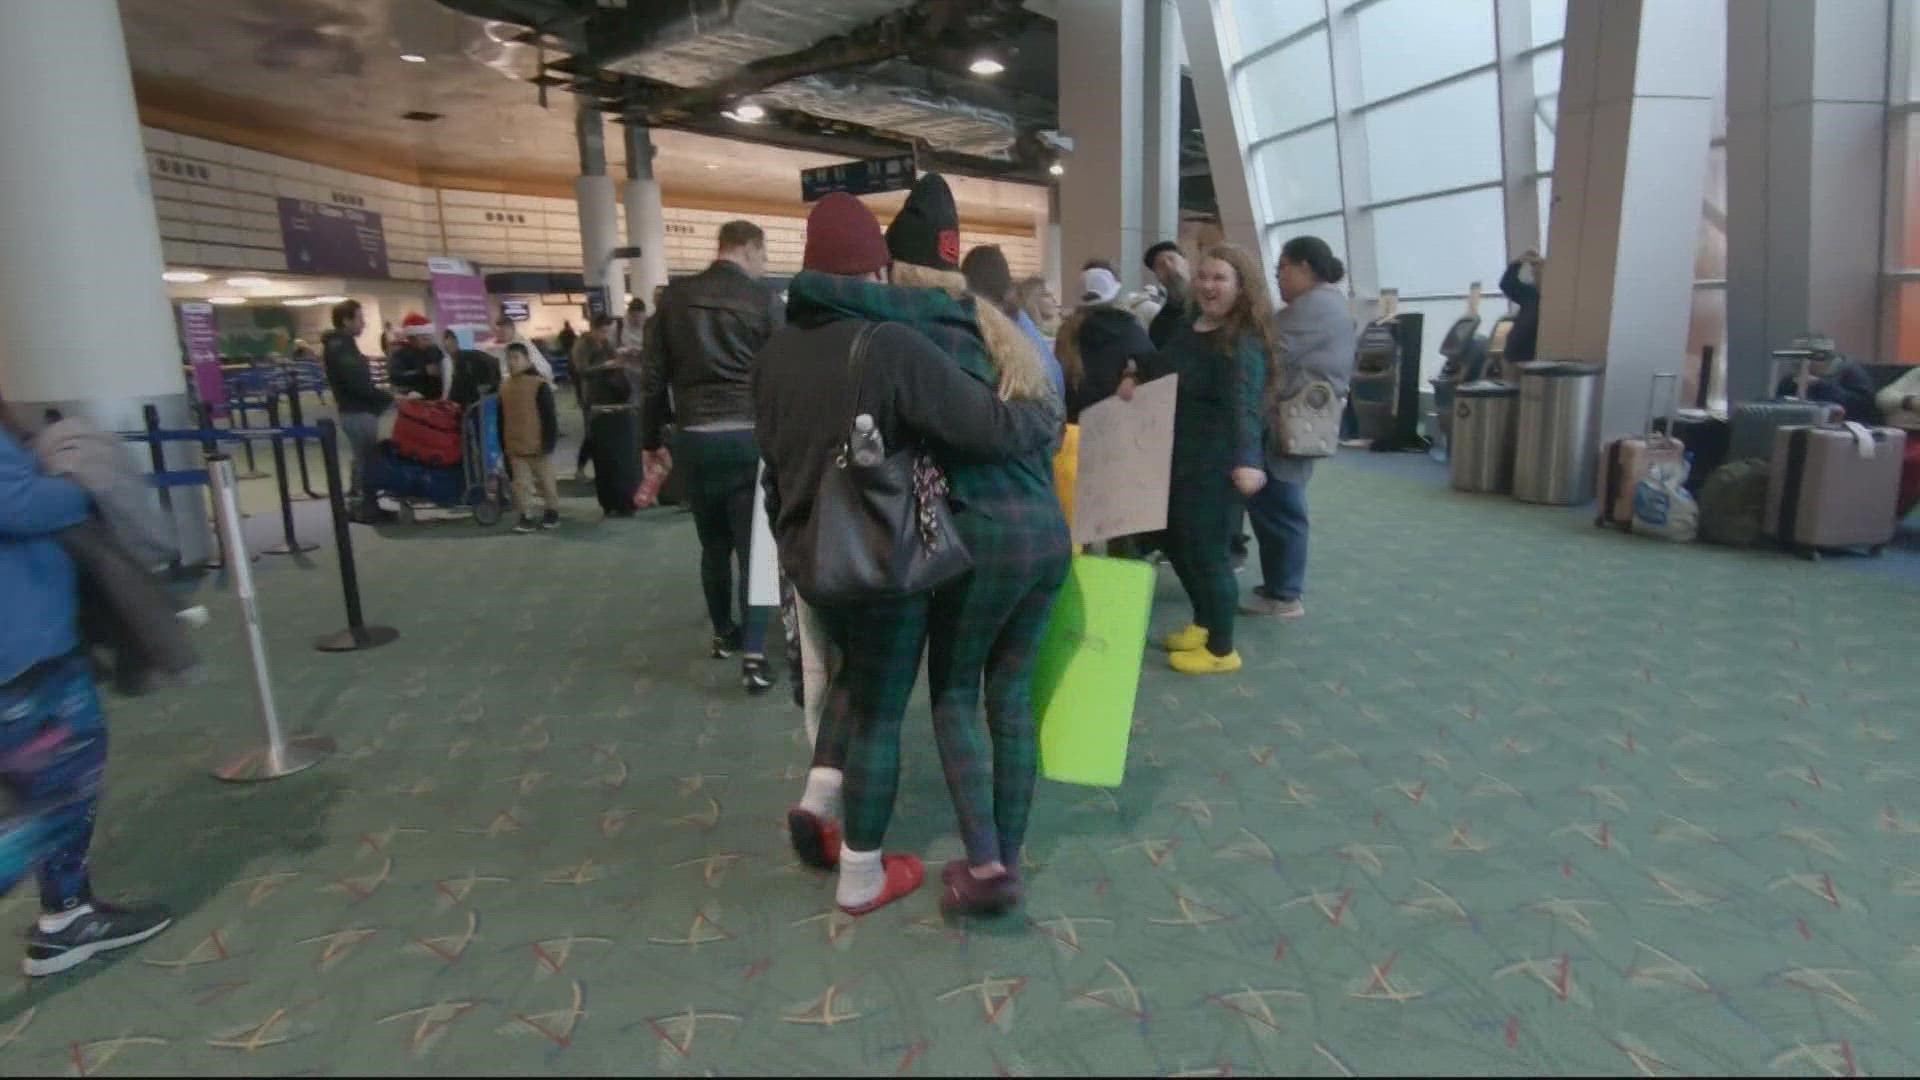 Alaska Airlines has resumed operations in Portland with some expected cancellations due to displaced aircraft and crews as a result of Friday's storm.